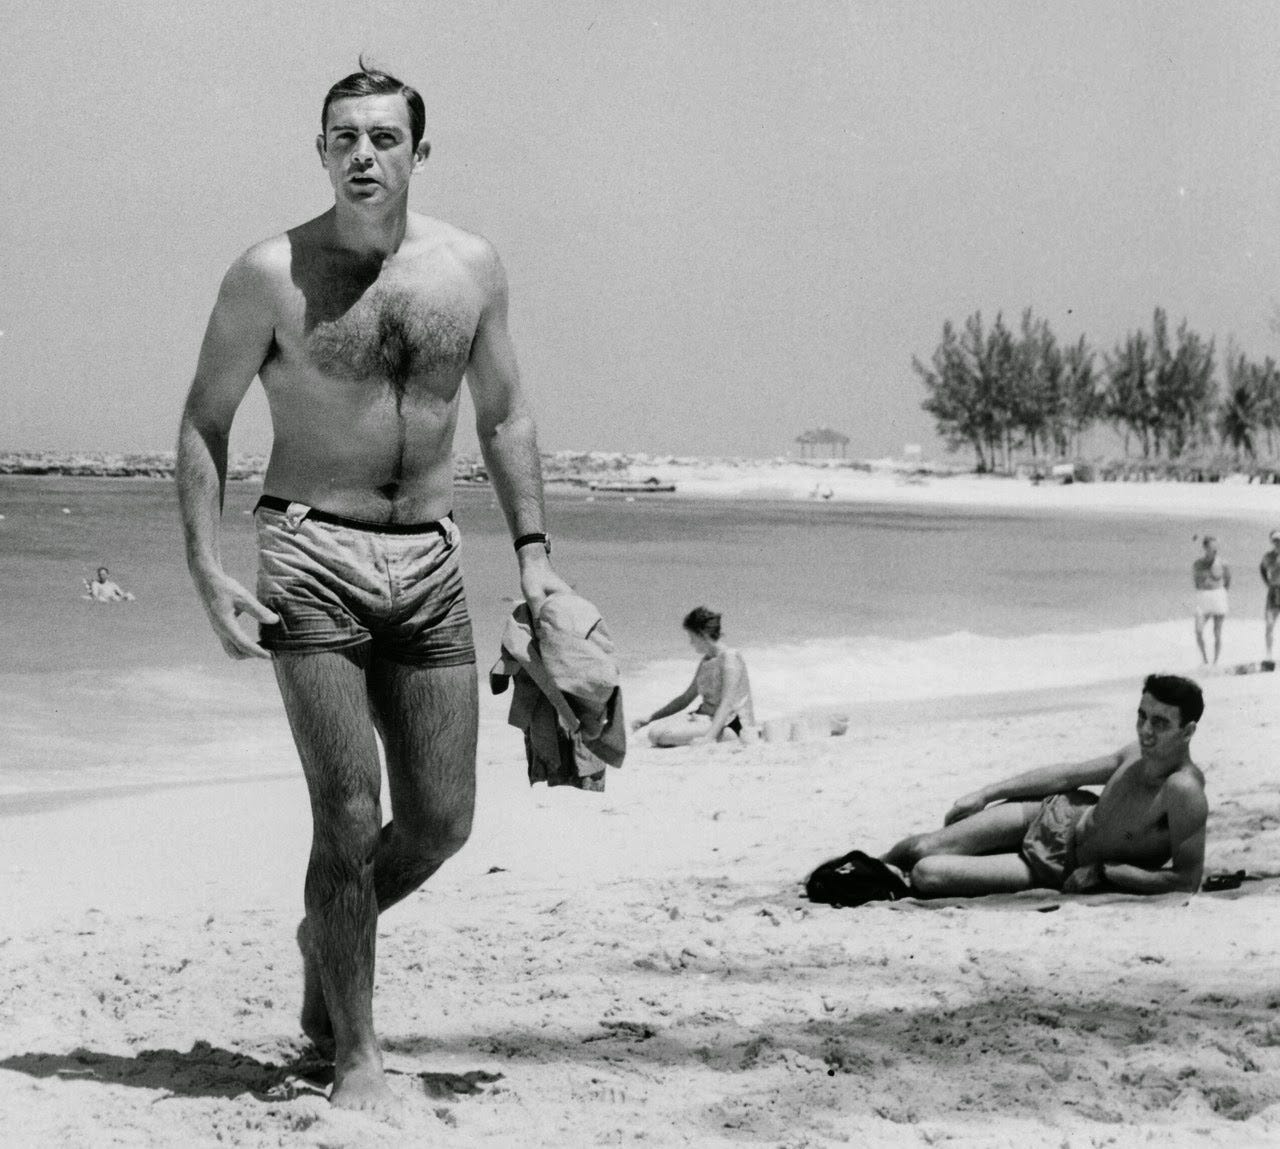 Sean Connery Behind the scenes at the beach for THUNDERBALL - Flashbak